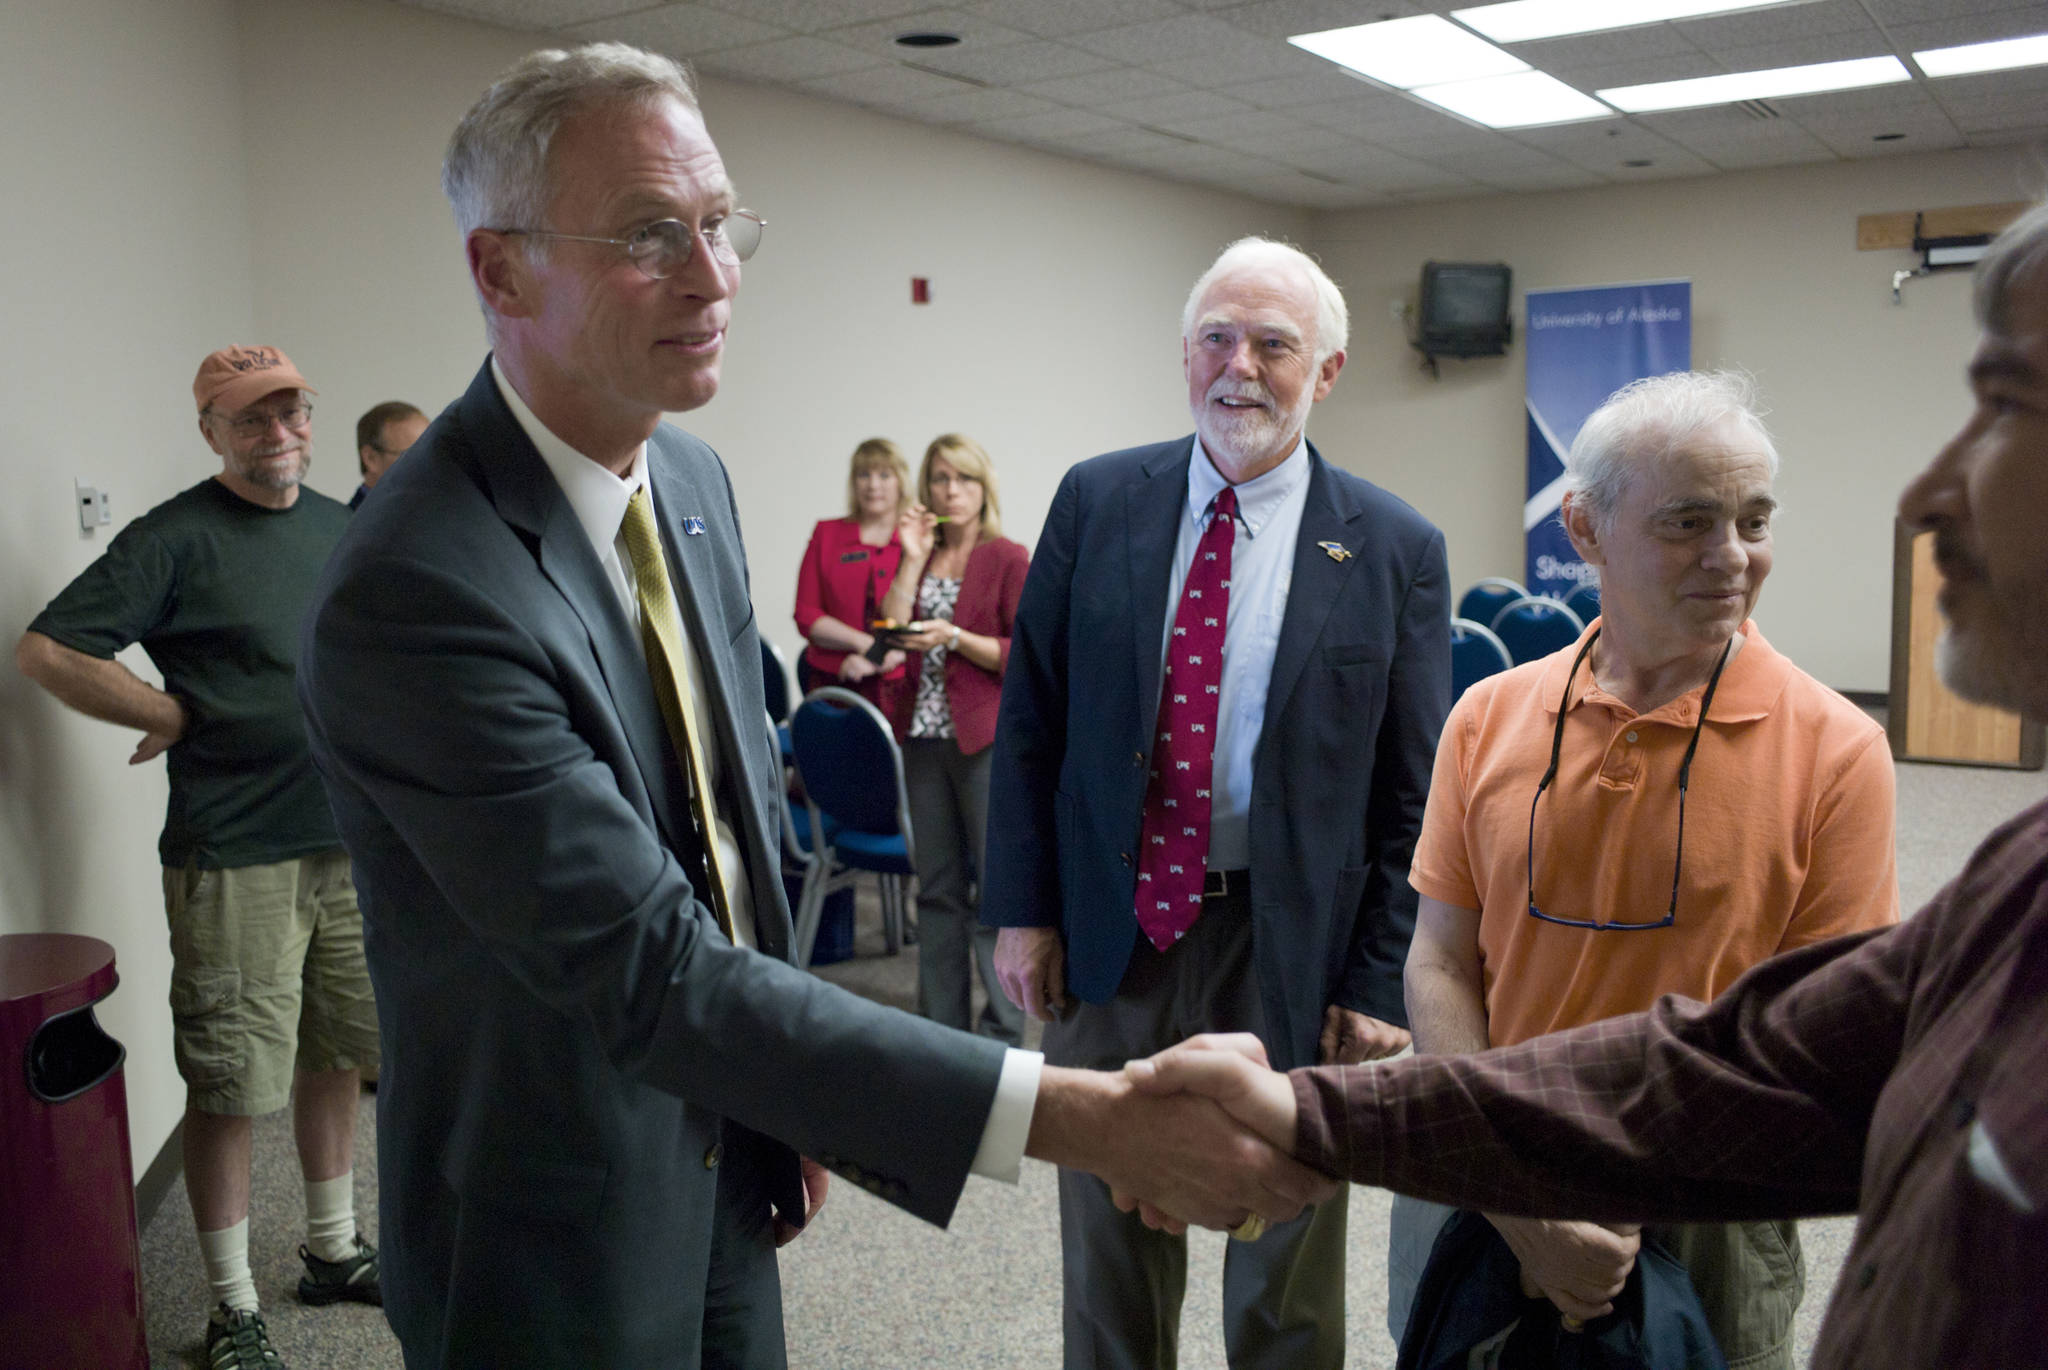 In this July 7, 2015 photo, Dr. Jim Johnsen is greeted by Rep. Sam Kito III, right, as University of Alaska Southeast Chancellor Dr. Richard Caulfield, center, looks on during a gathering at Centennial Hall. (Michael Penn | Juneau Empire File)